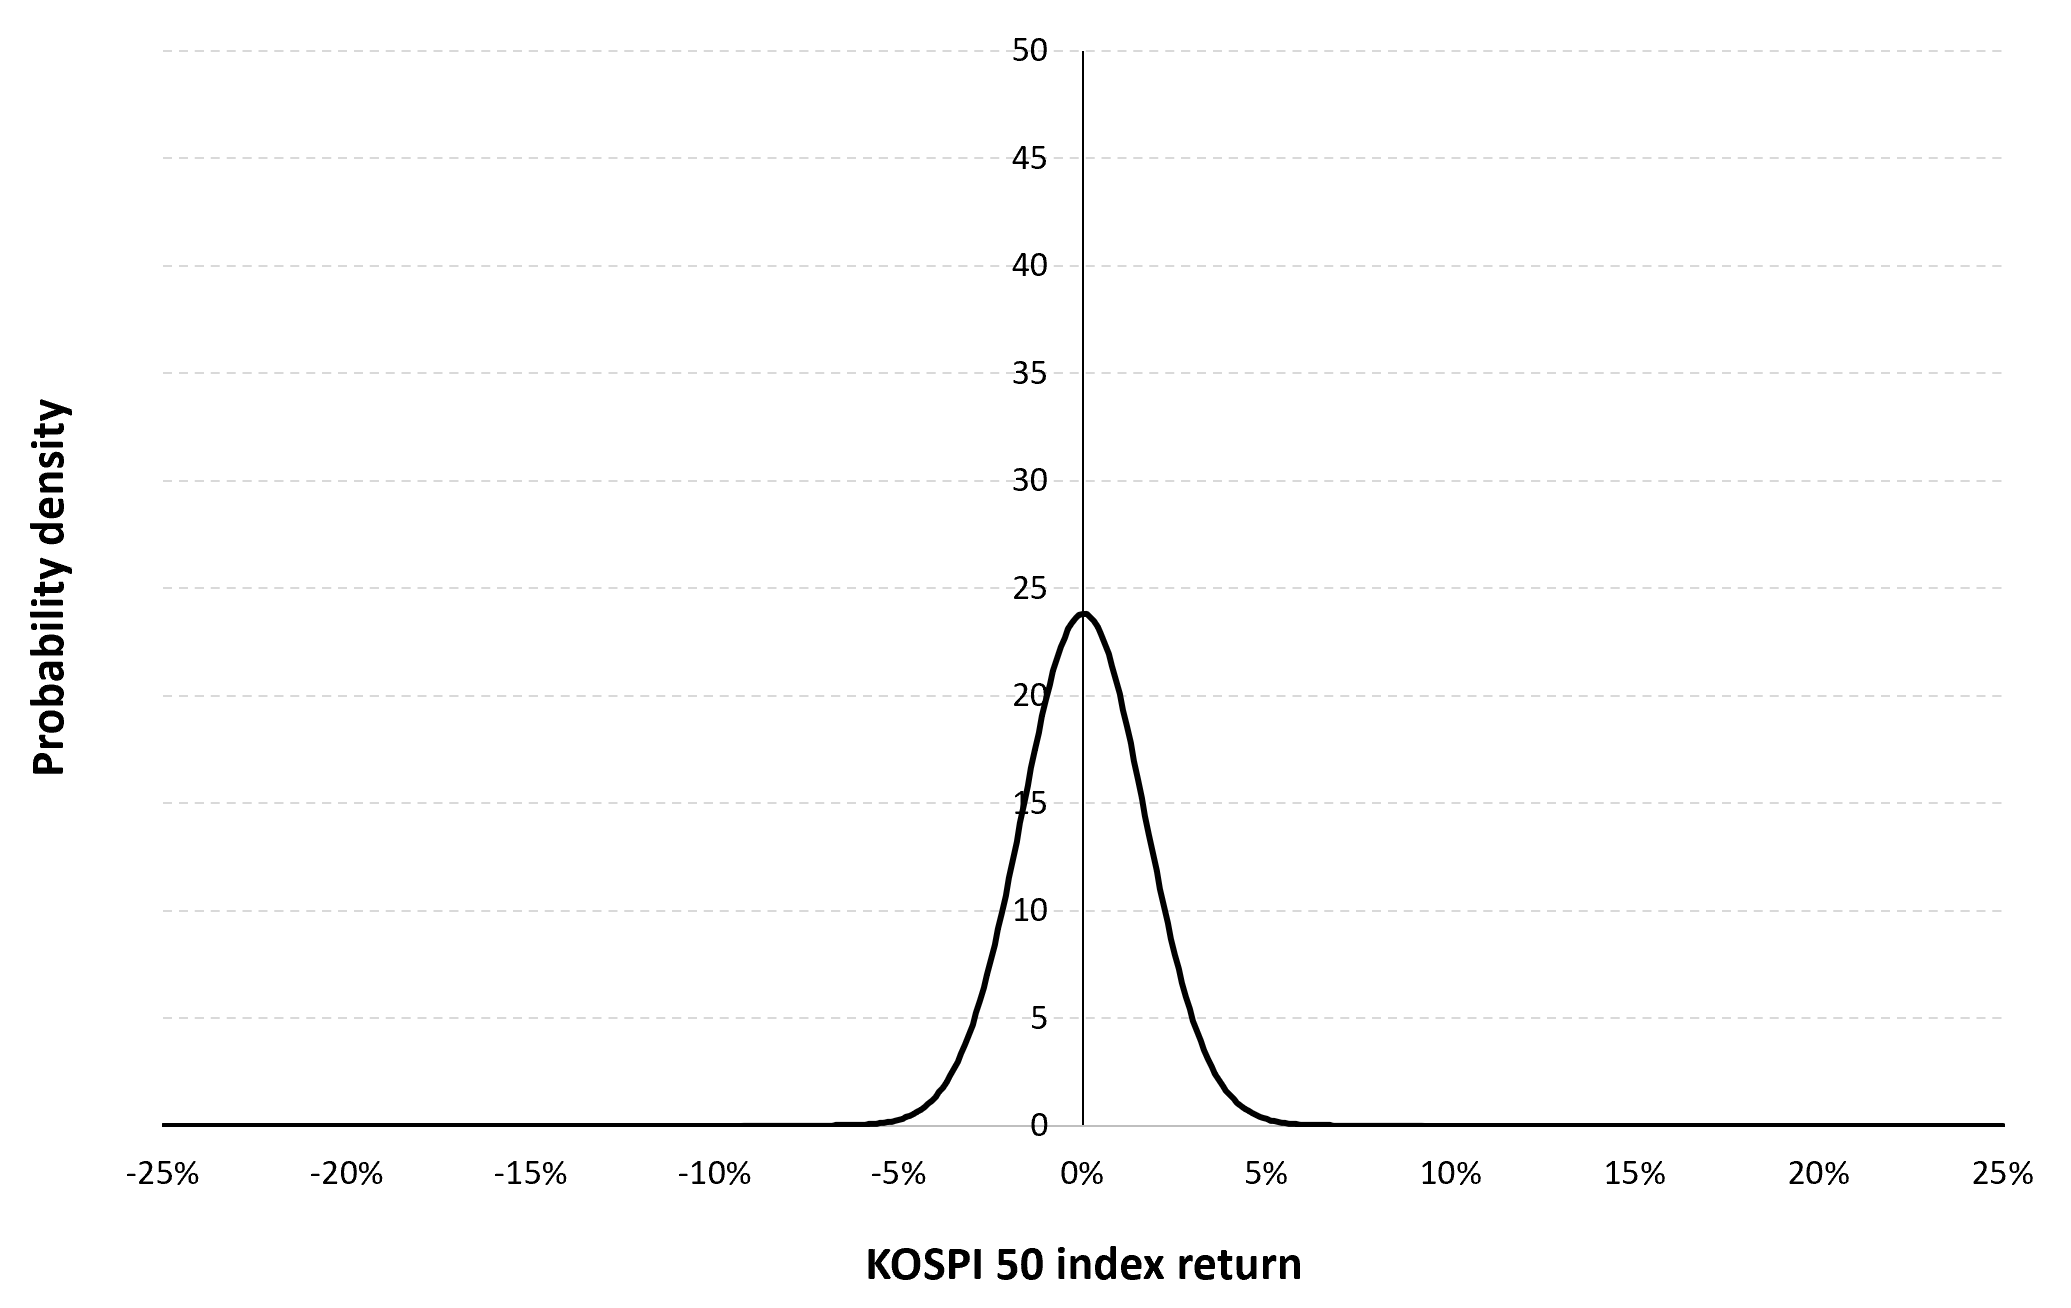 Gaussian distribution of the daily KOSPI 50 index returns